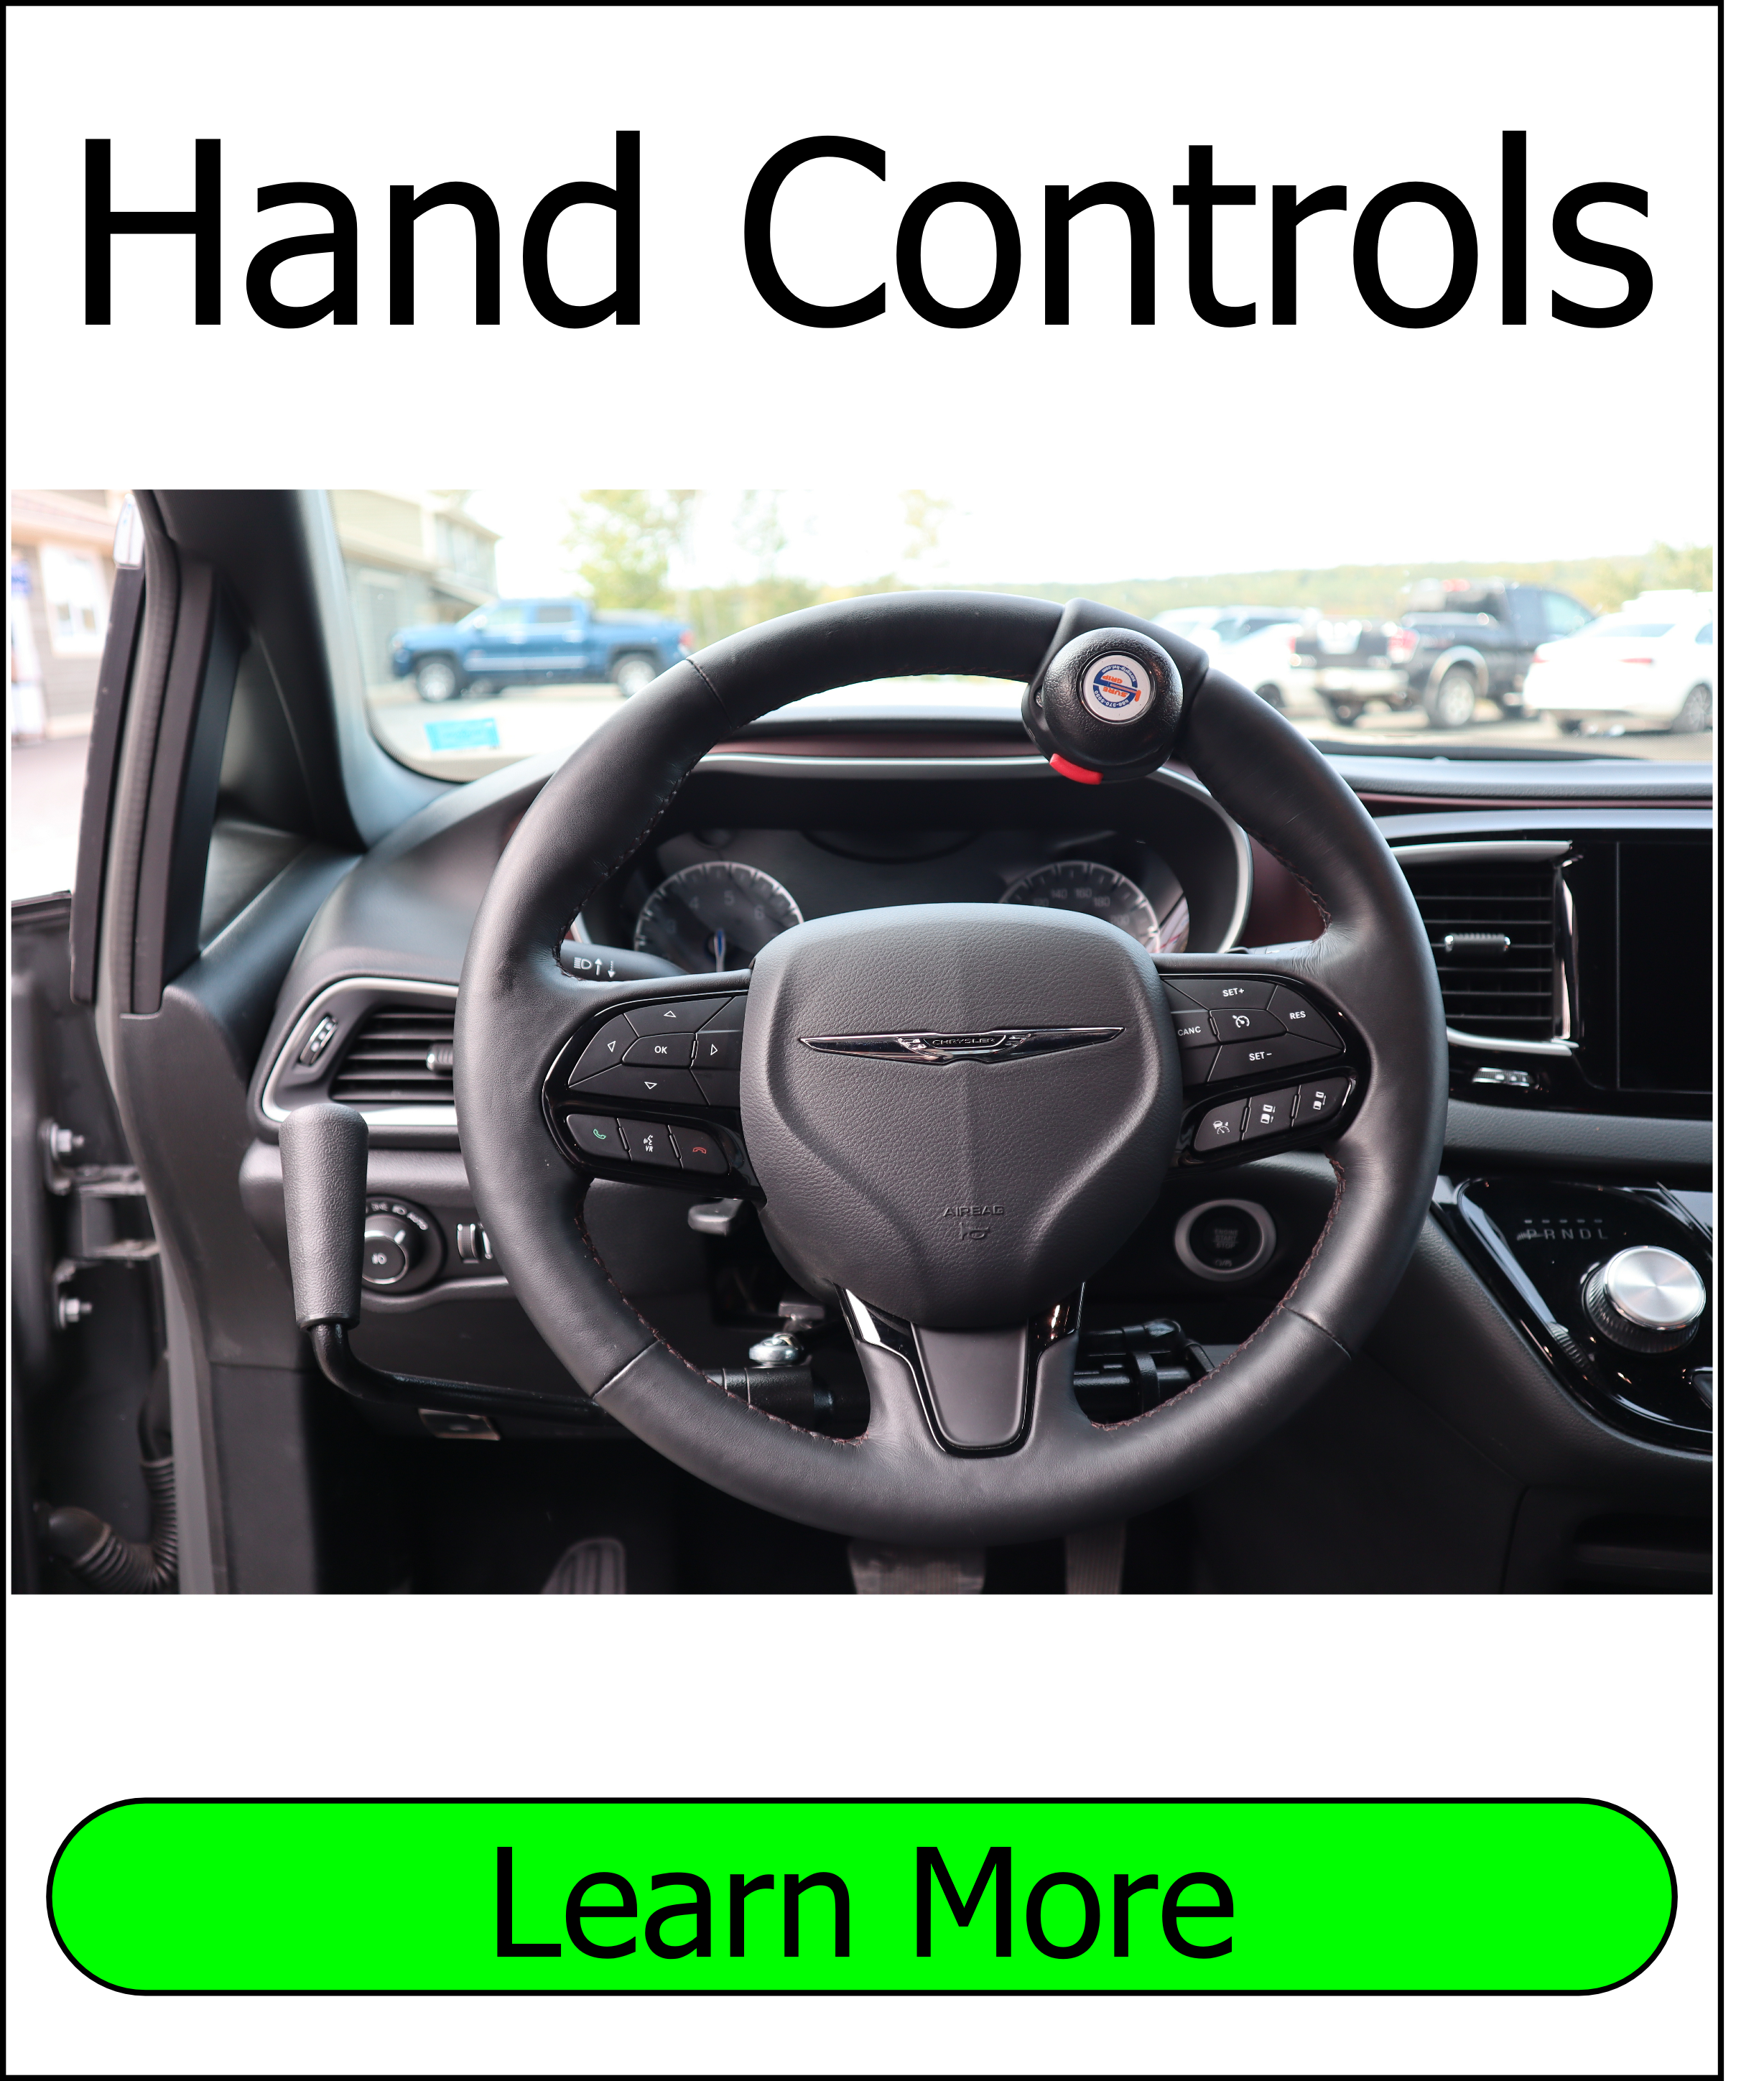 We Install Hand Controls